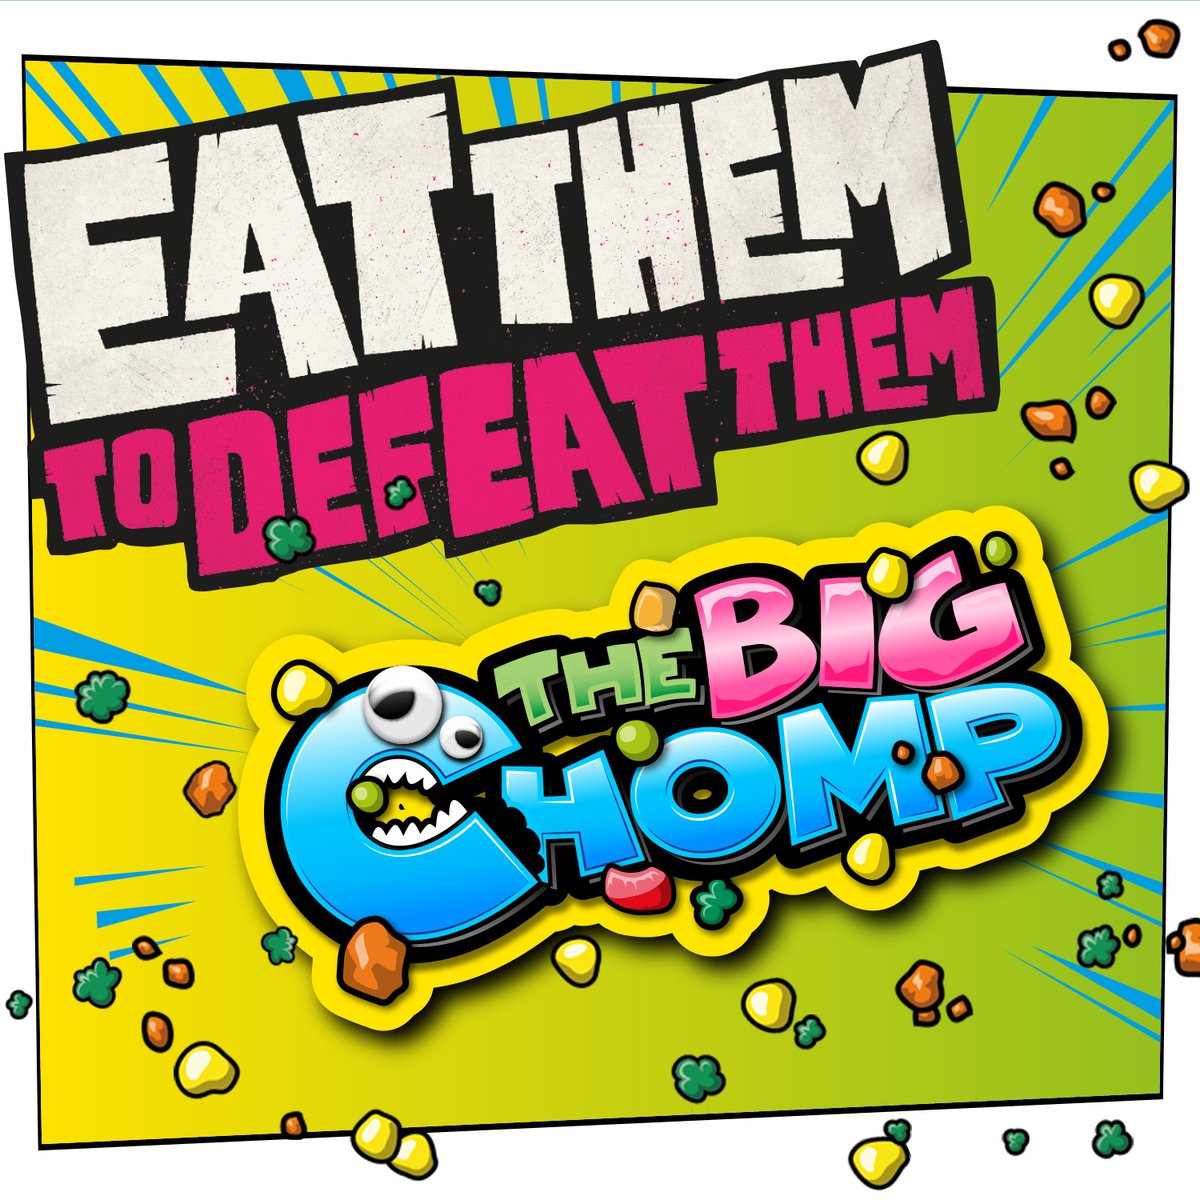 🥕🥦 #EatThemToDefeatThem has returned, and @coopuk are helping to spread the word! Join The Big Chomp and munch, crunch and chomp those veggies! Find top tips, fun and prizes at eatthemtodefeatthem.com